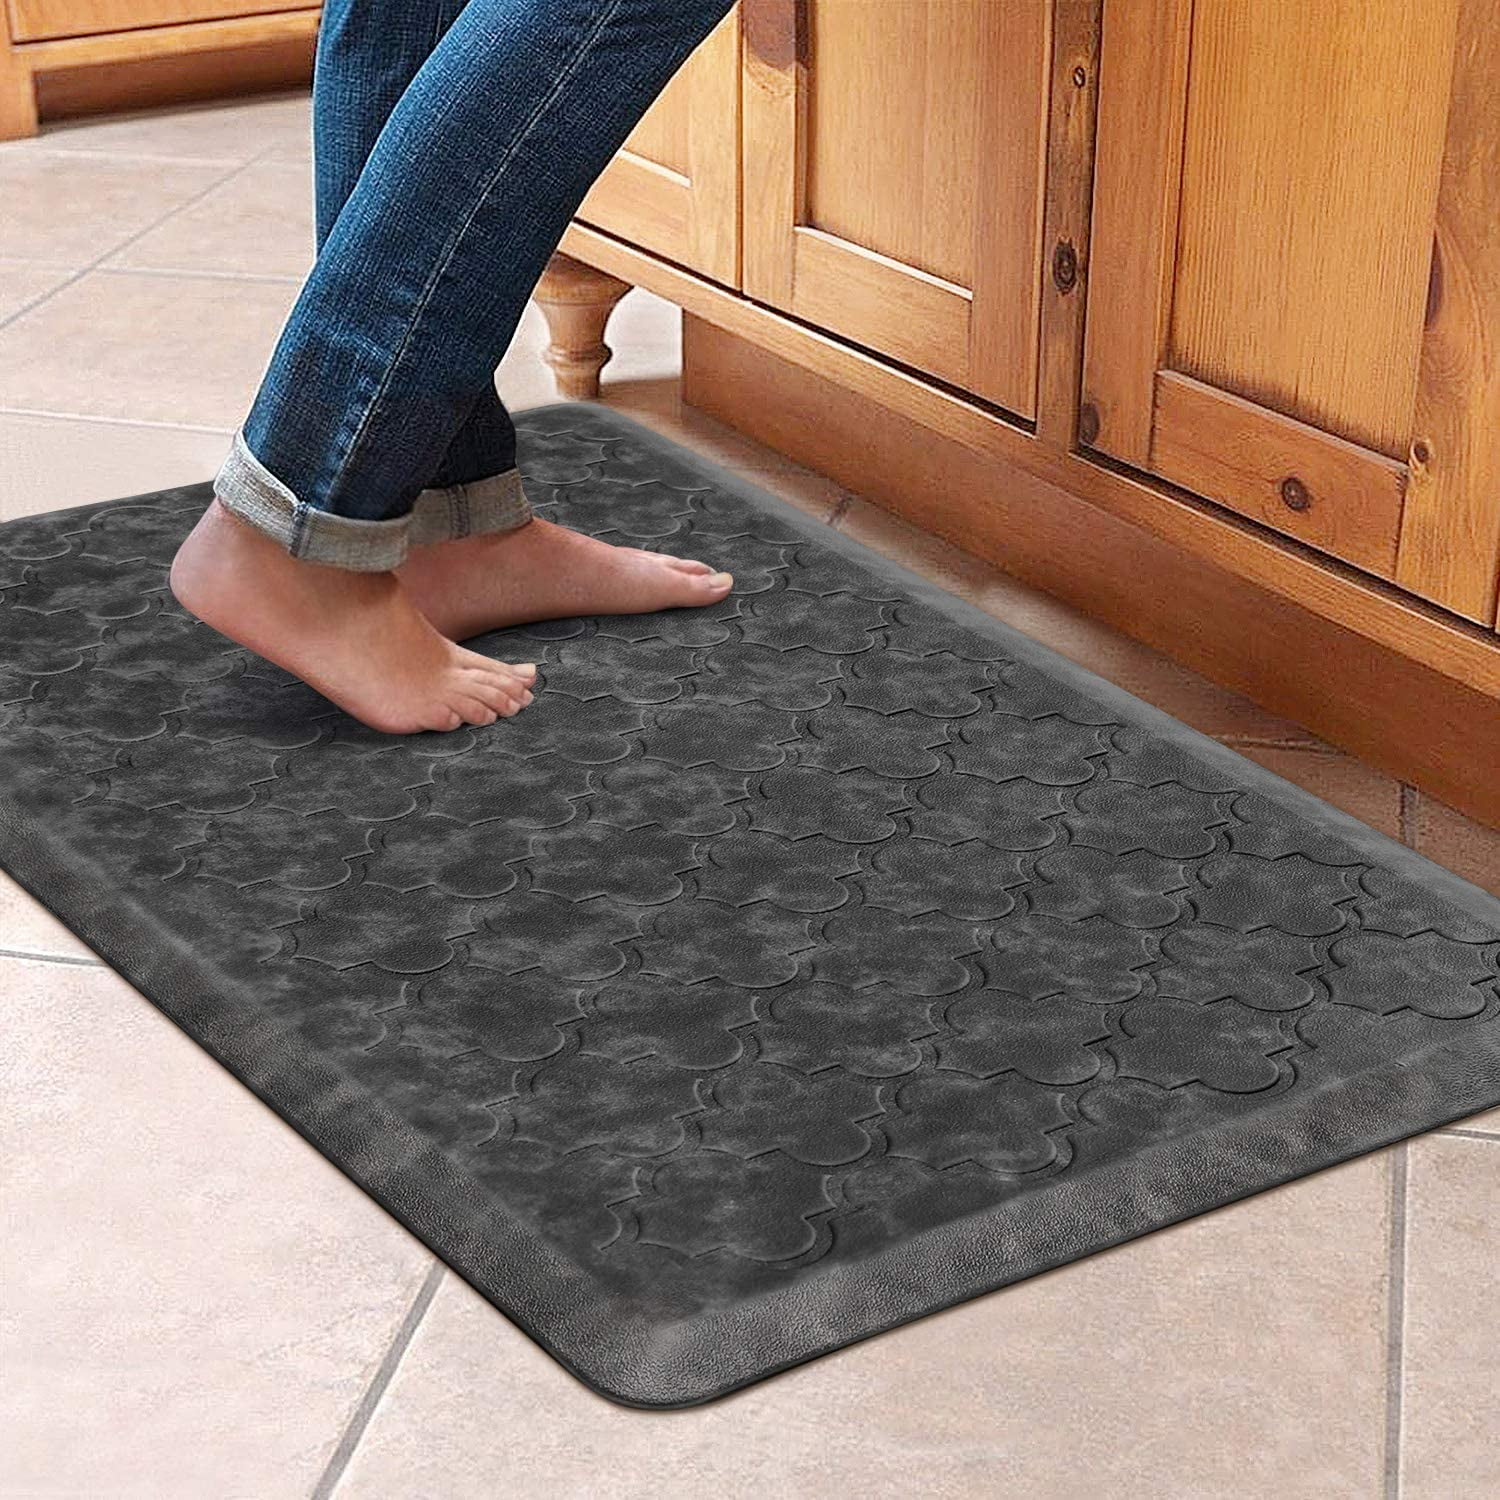 WiseLife Kitchen Mat Cushioned Anti Fatigue Floor Mat,17.3